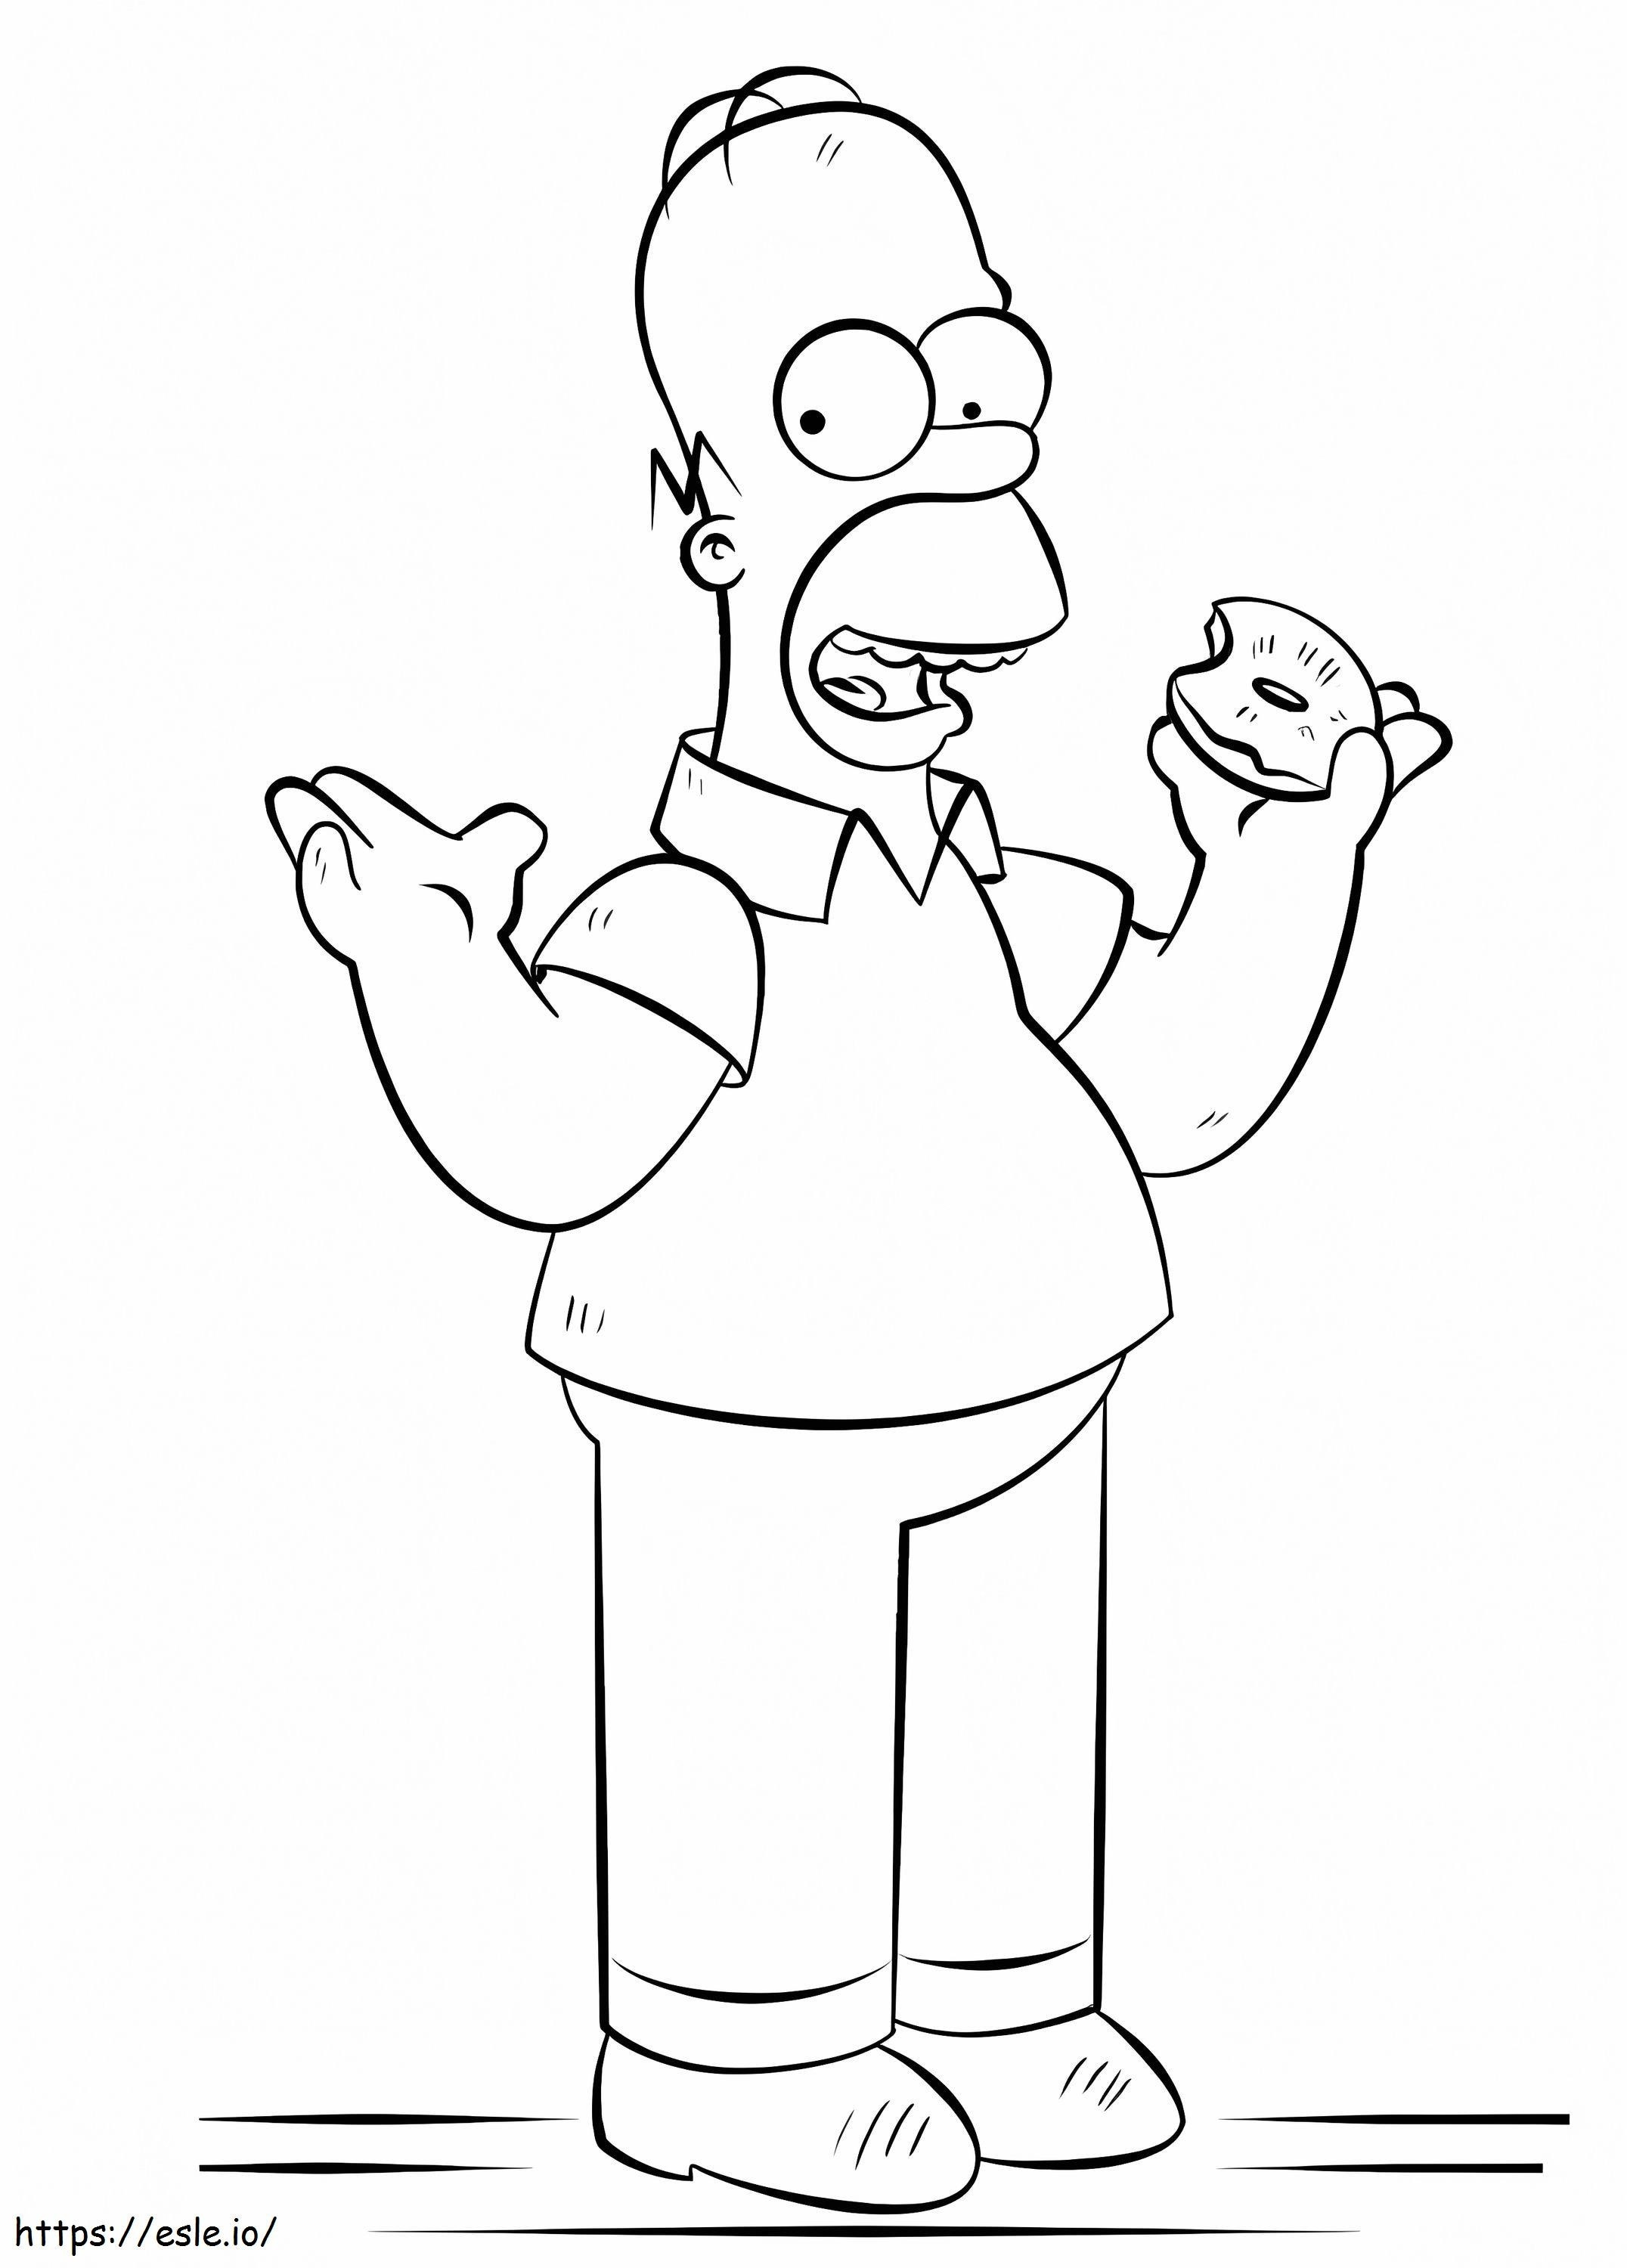 Cute Homer Simpson coloring page